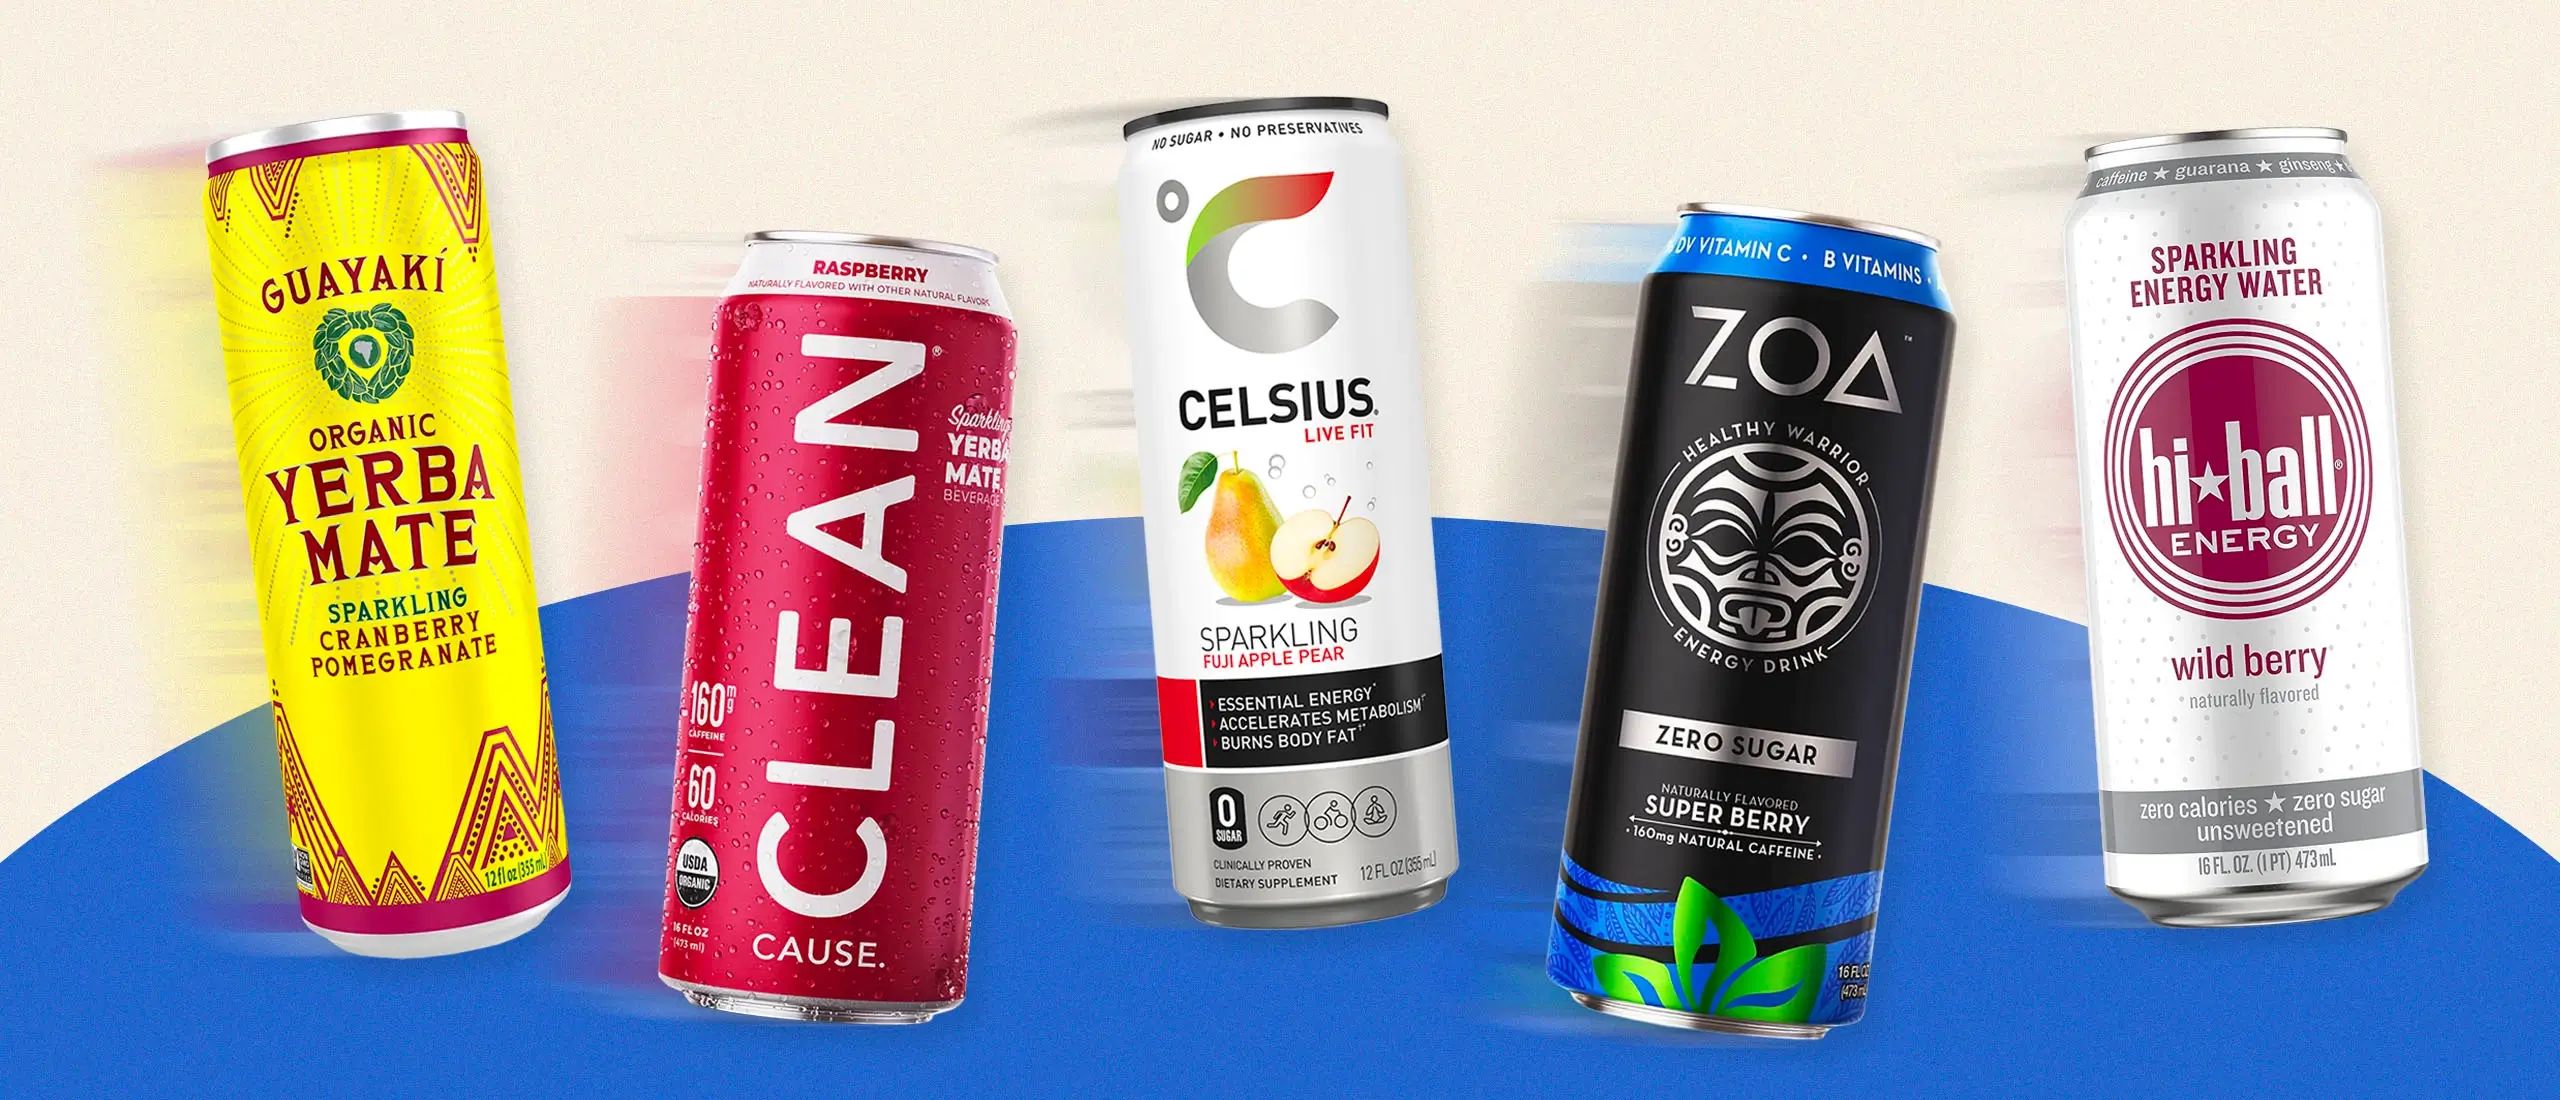 what is a good energy drink for seniors?